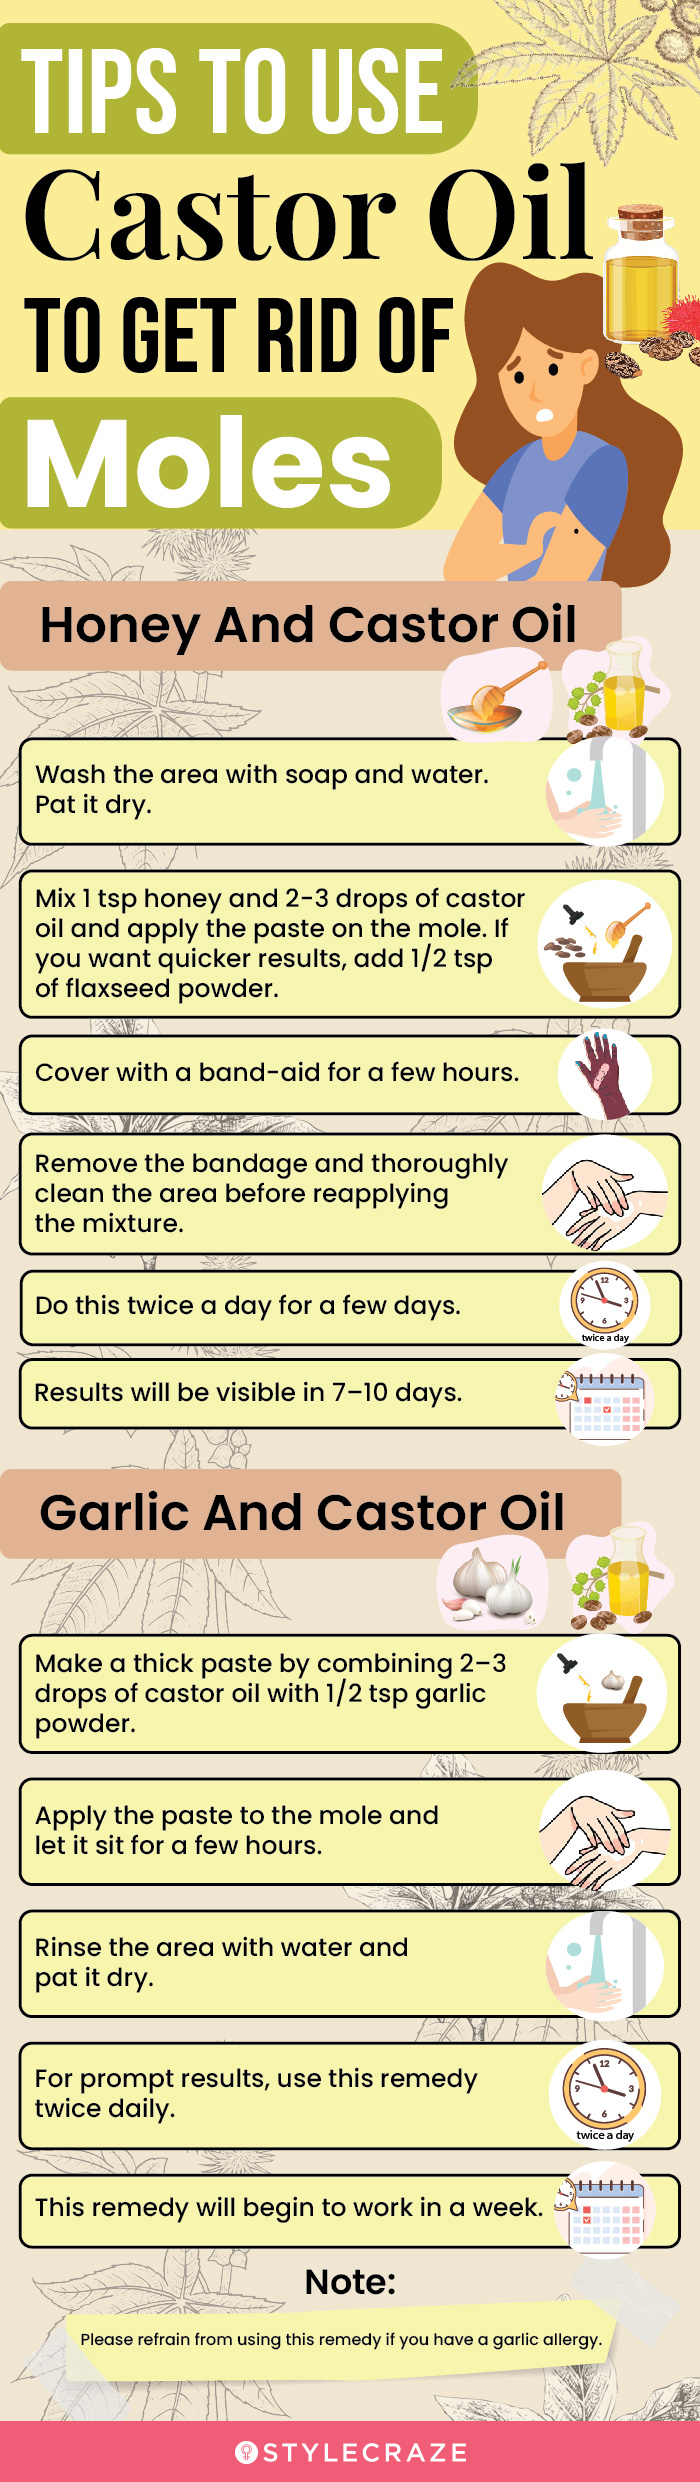 tips to use castor oil to get rid of moles (infographic)